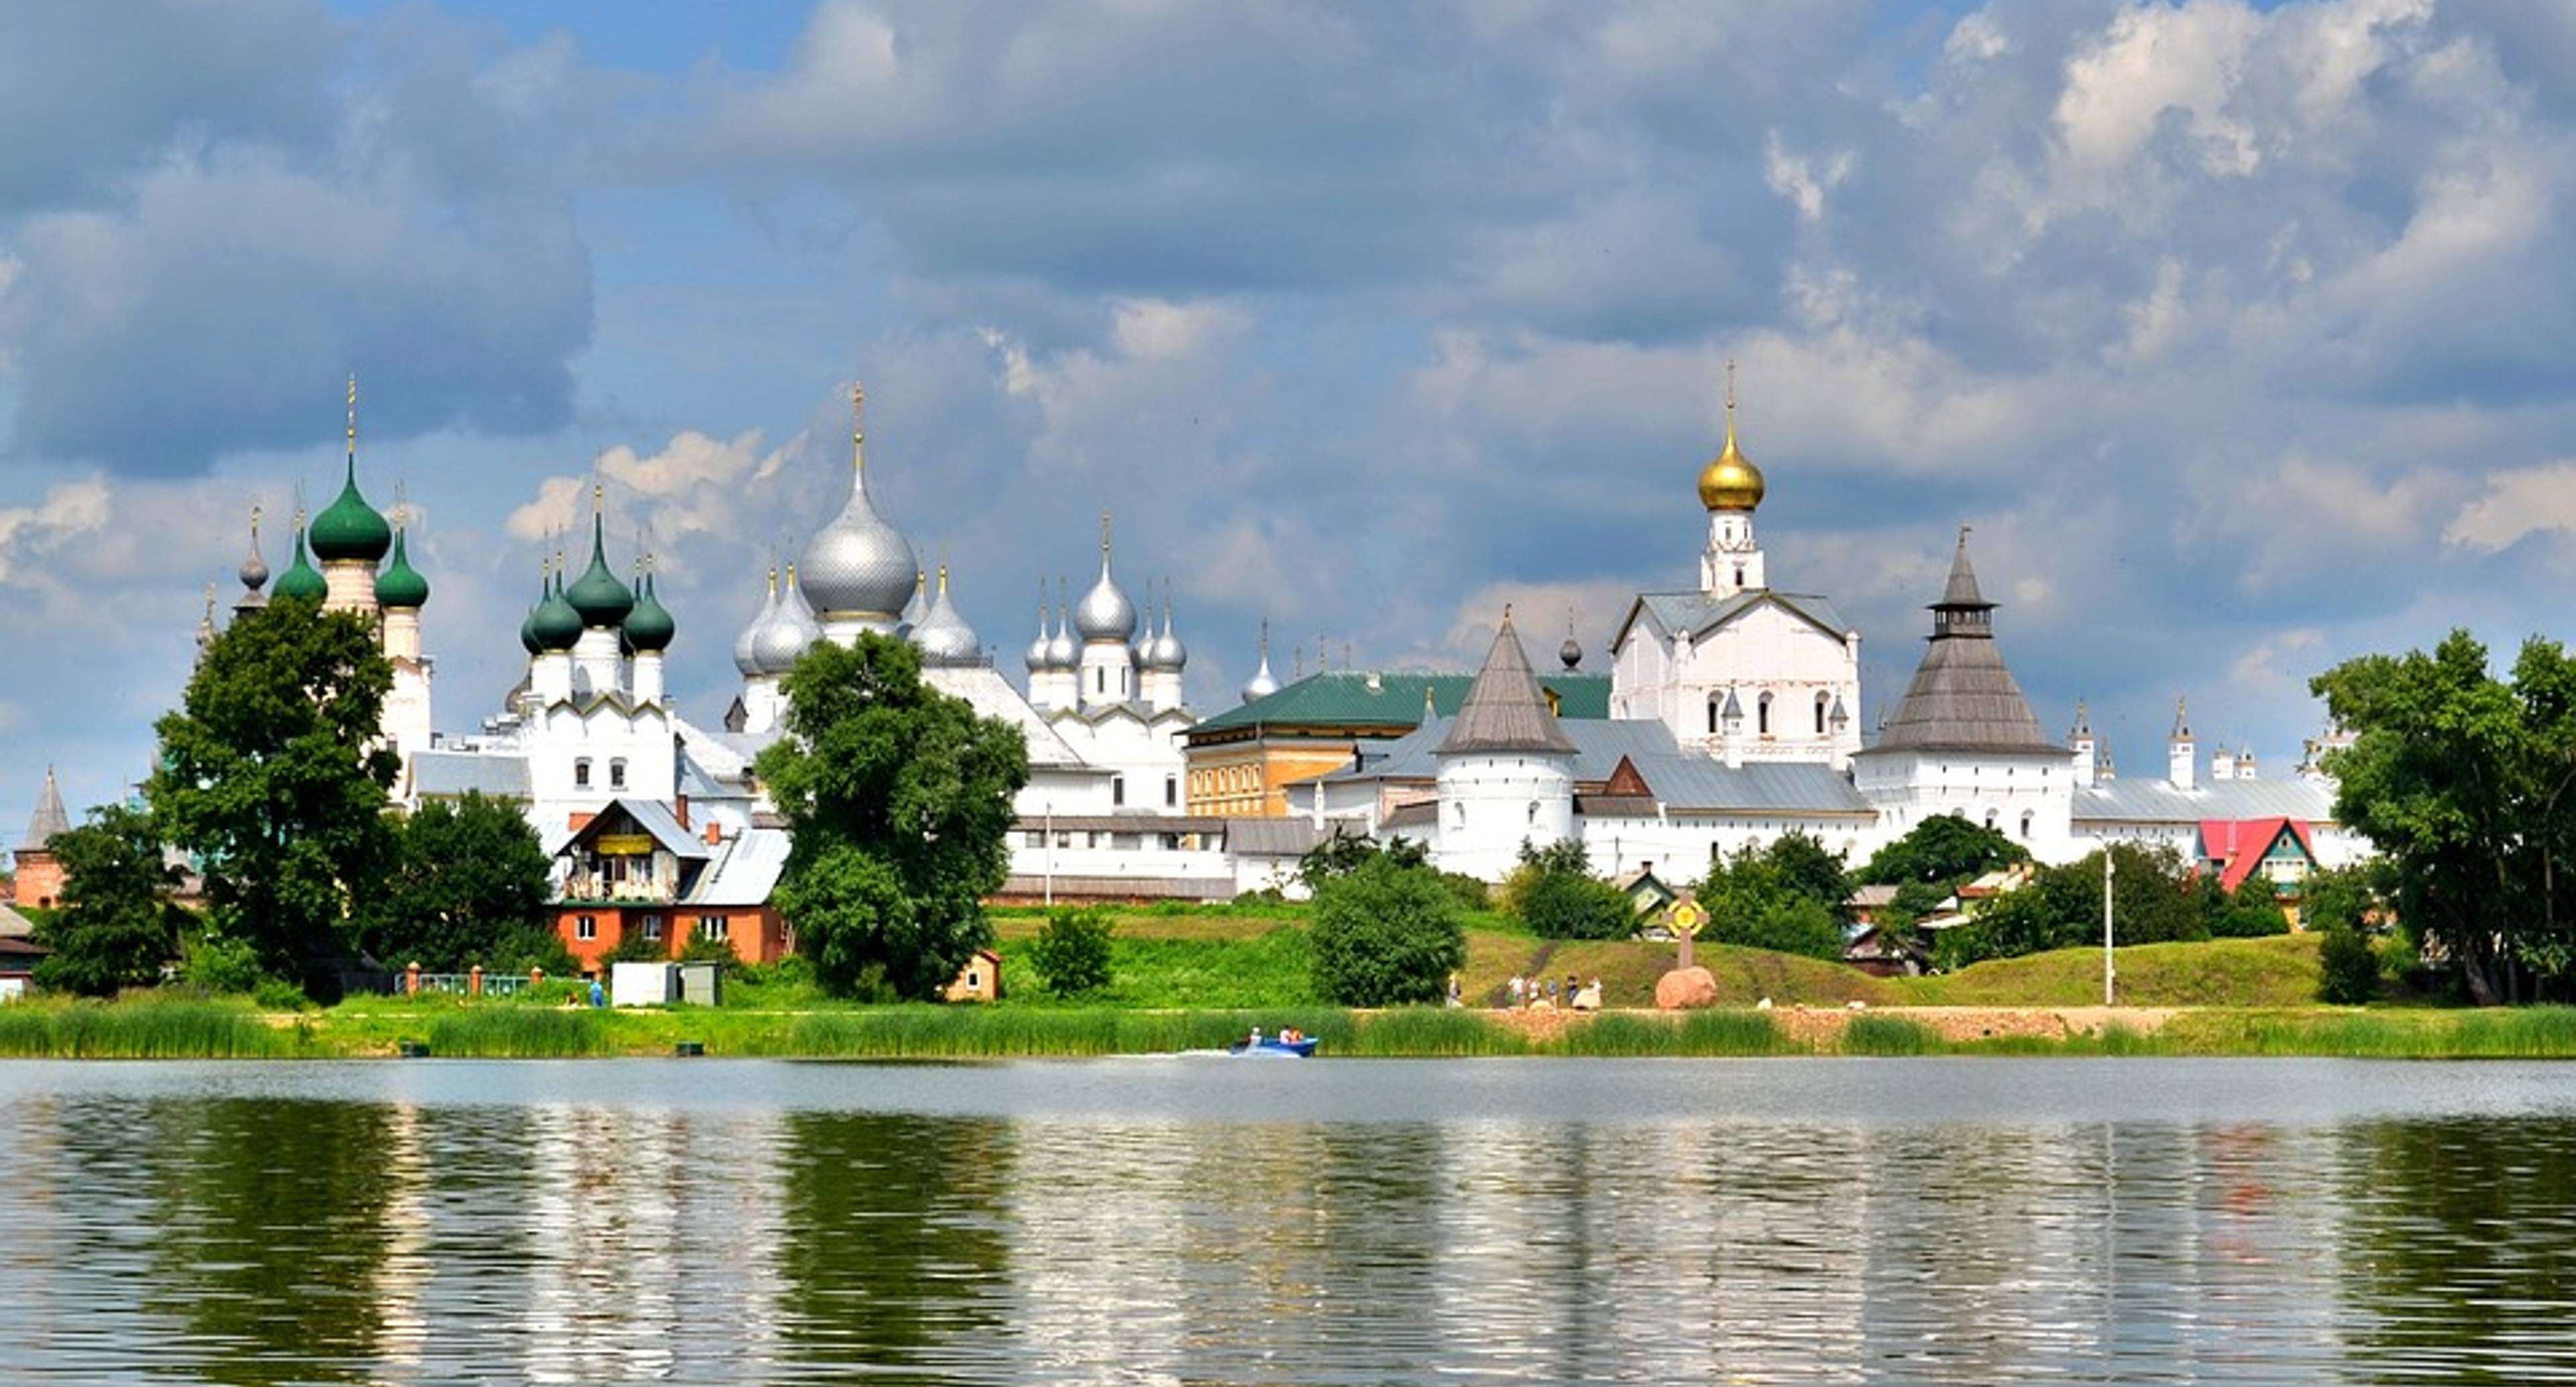 Rostov Veliky - the pearl of Russian history